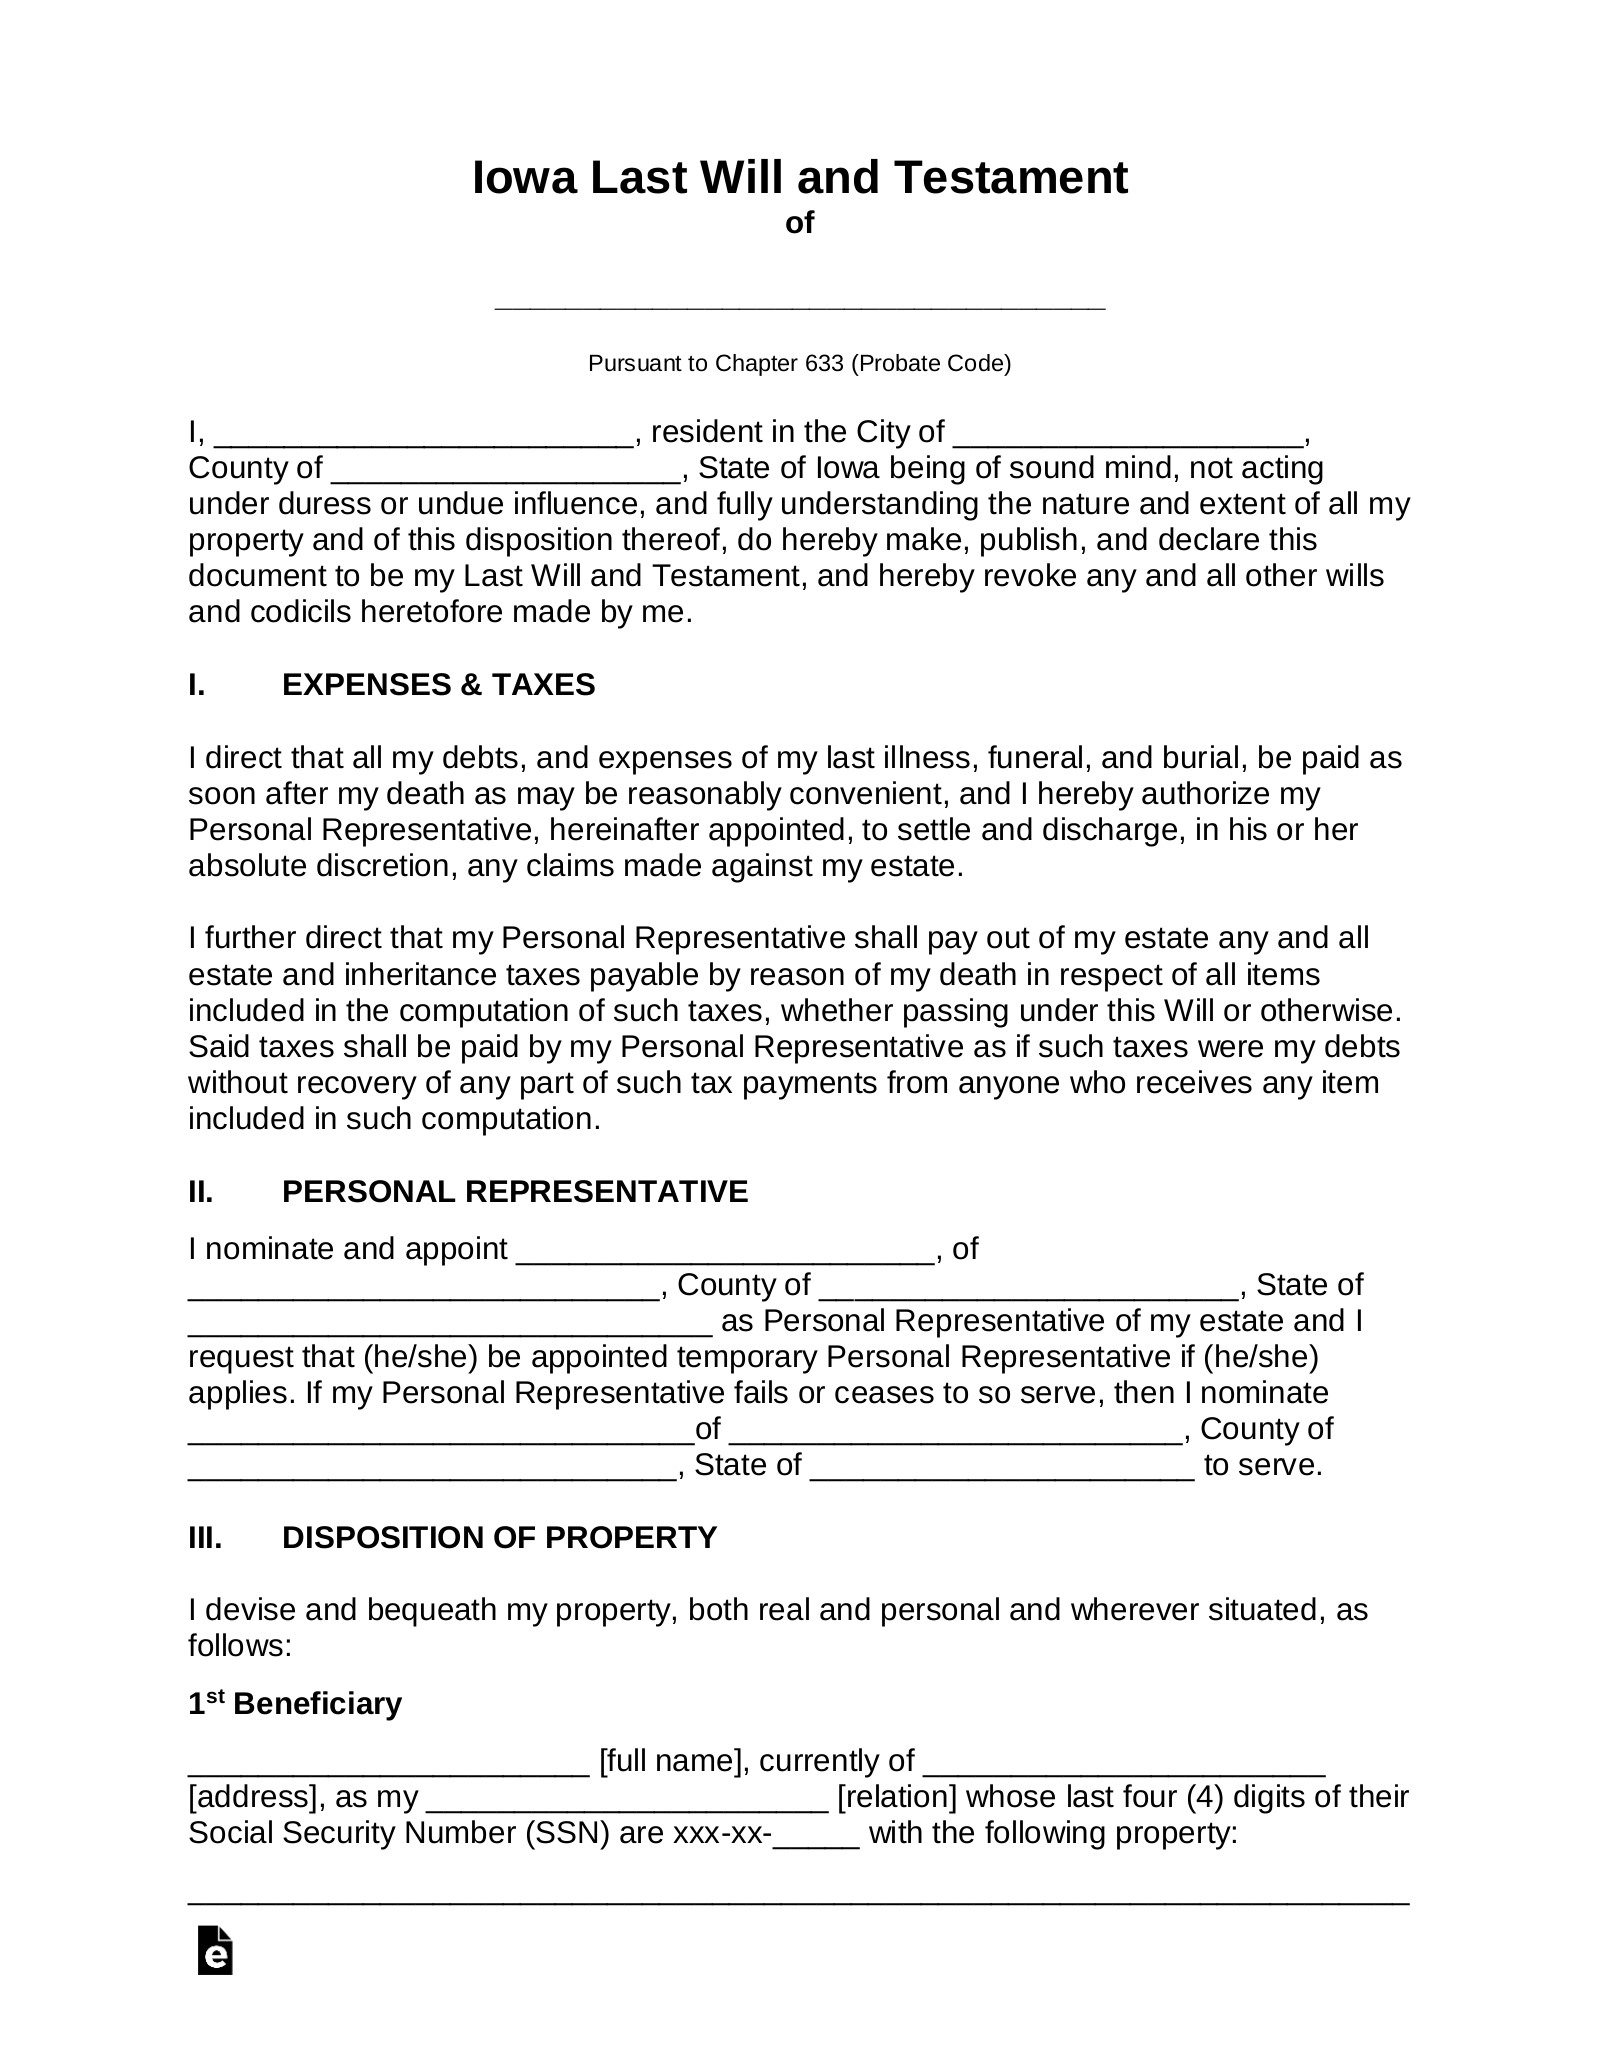 free-iowa-last-will-and-testament-template-pdf-word-eforms